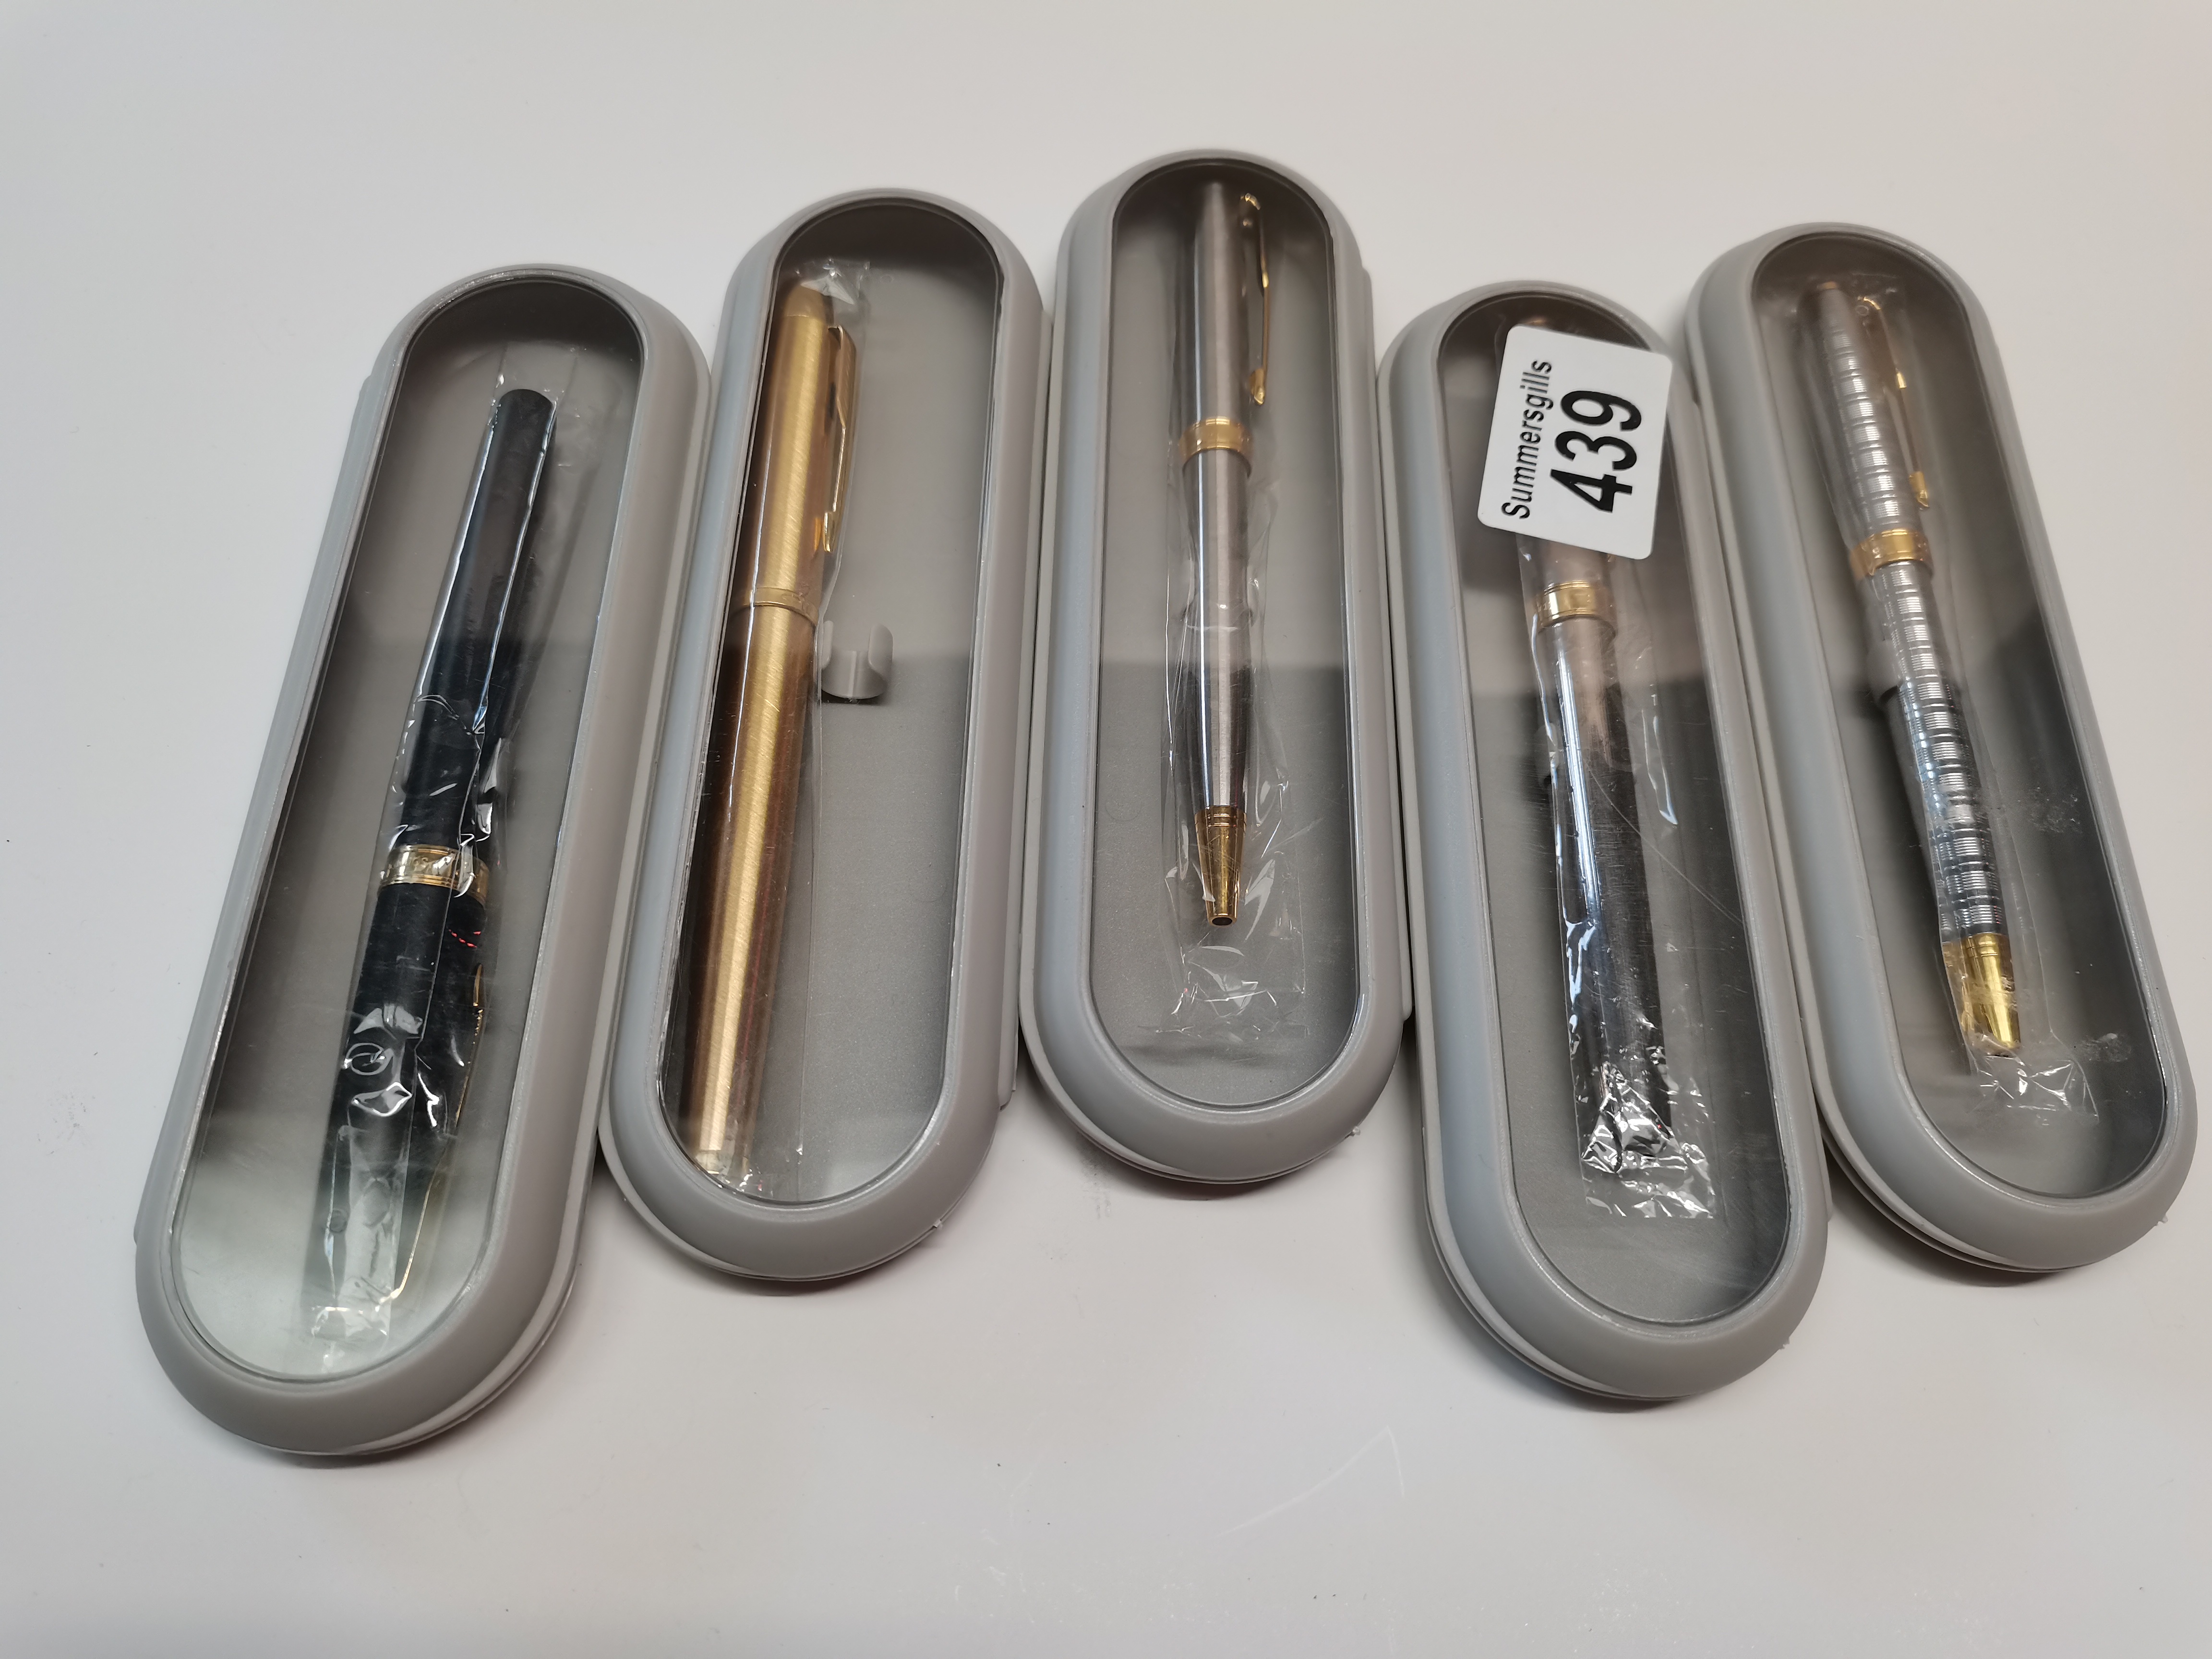 5 New Parker Pens in Cases